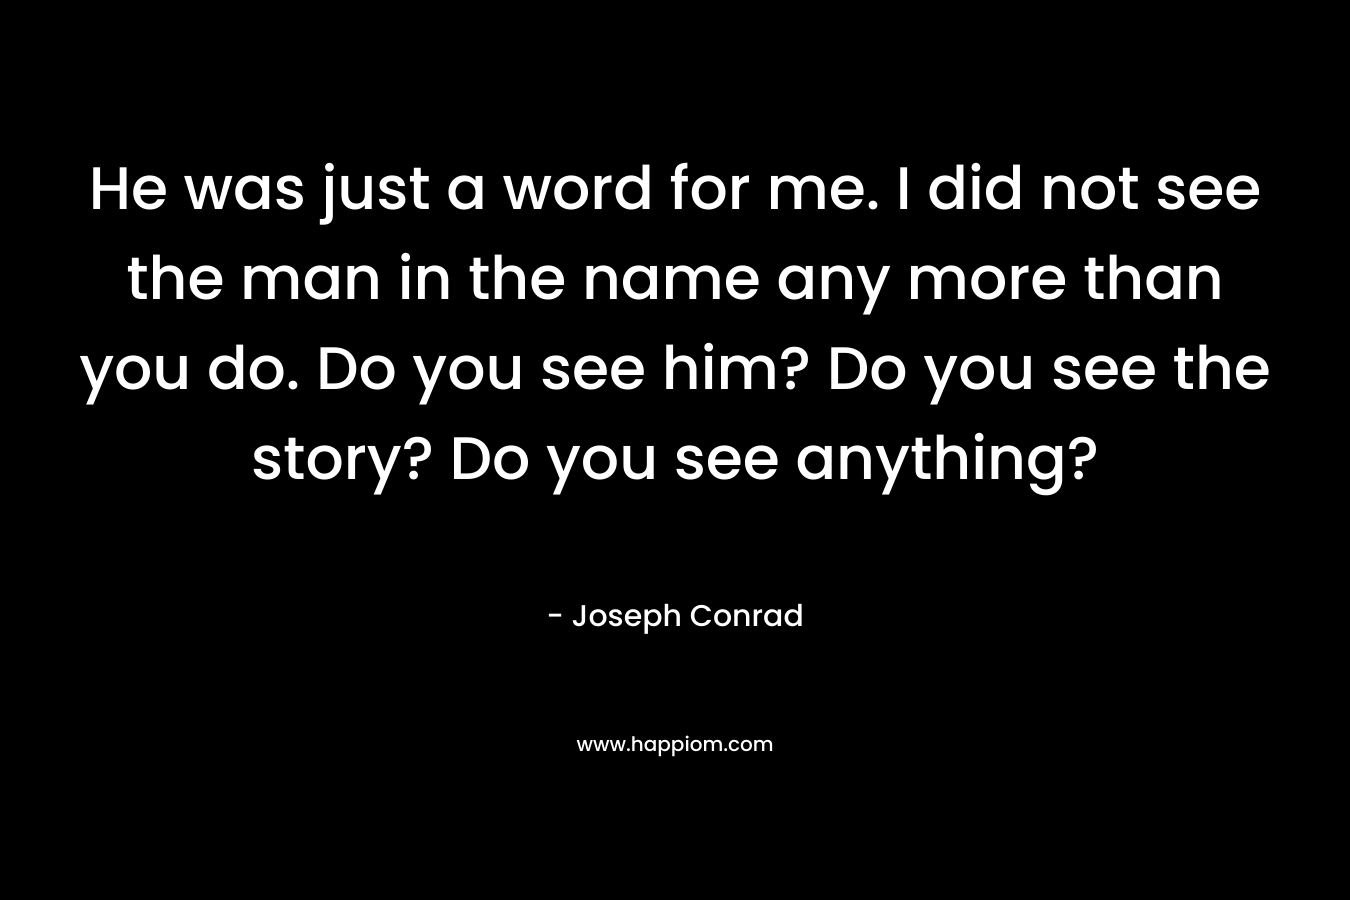 He was just a word for me. I did not see the man in the name any more than you do. Do you see him? Do you see the story? Do you see anything? – Joseph Conrad